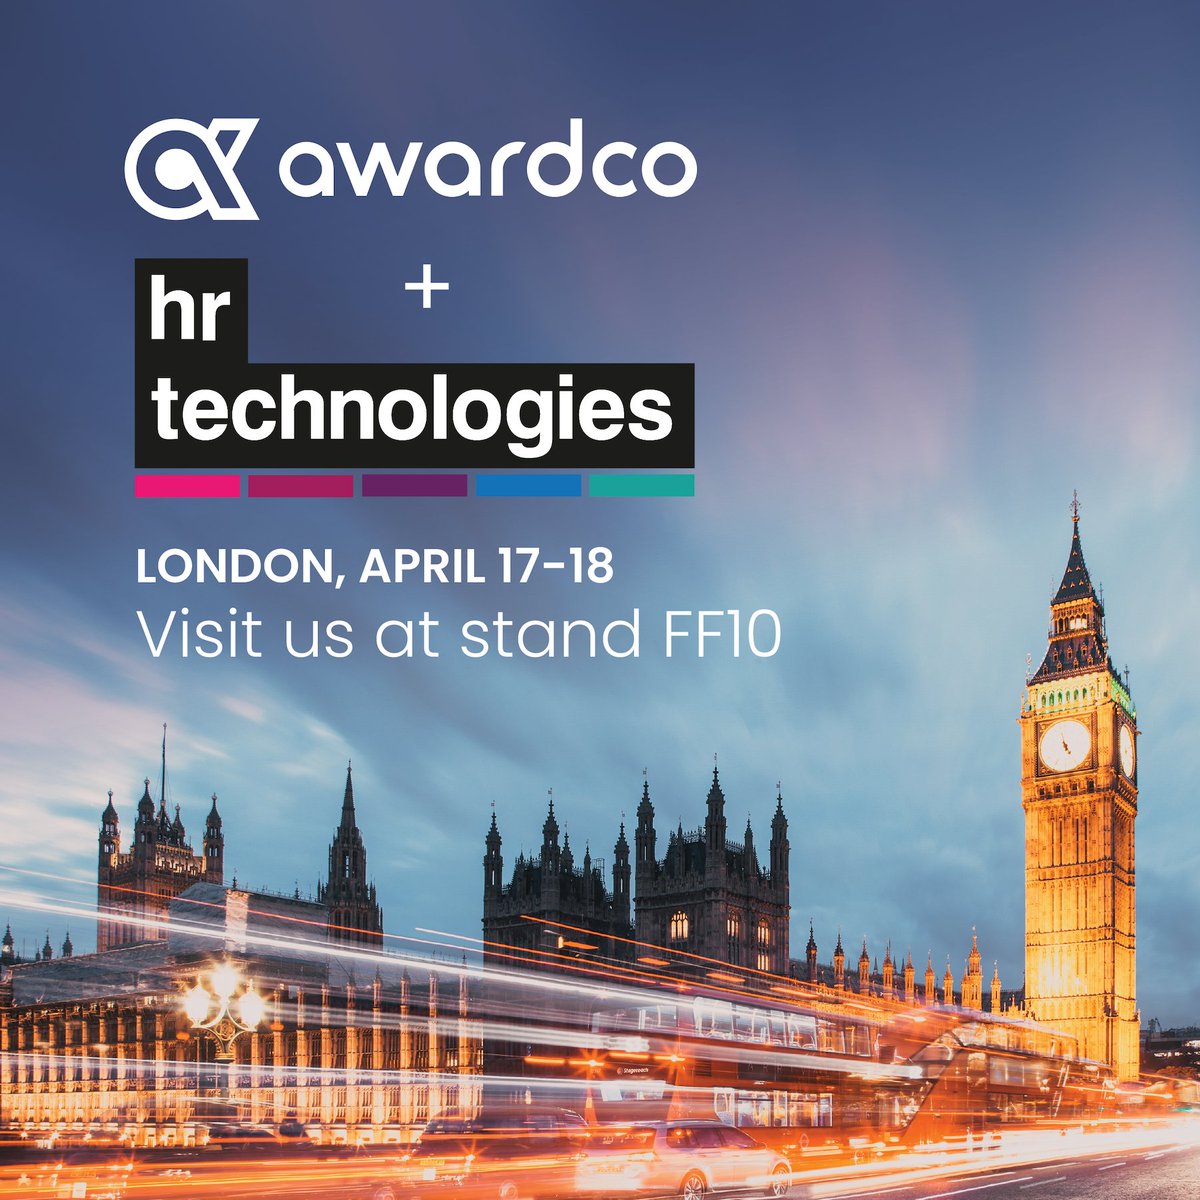 We're LIVE today at HR Technologies UK! Come say hello! #hrtech #uk #london #events #awardco